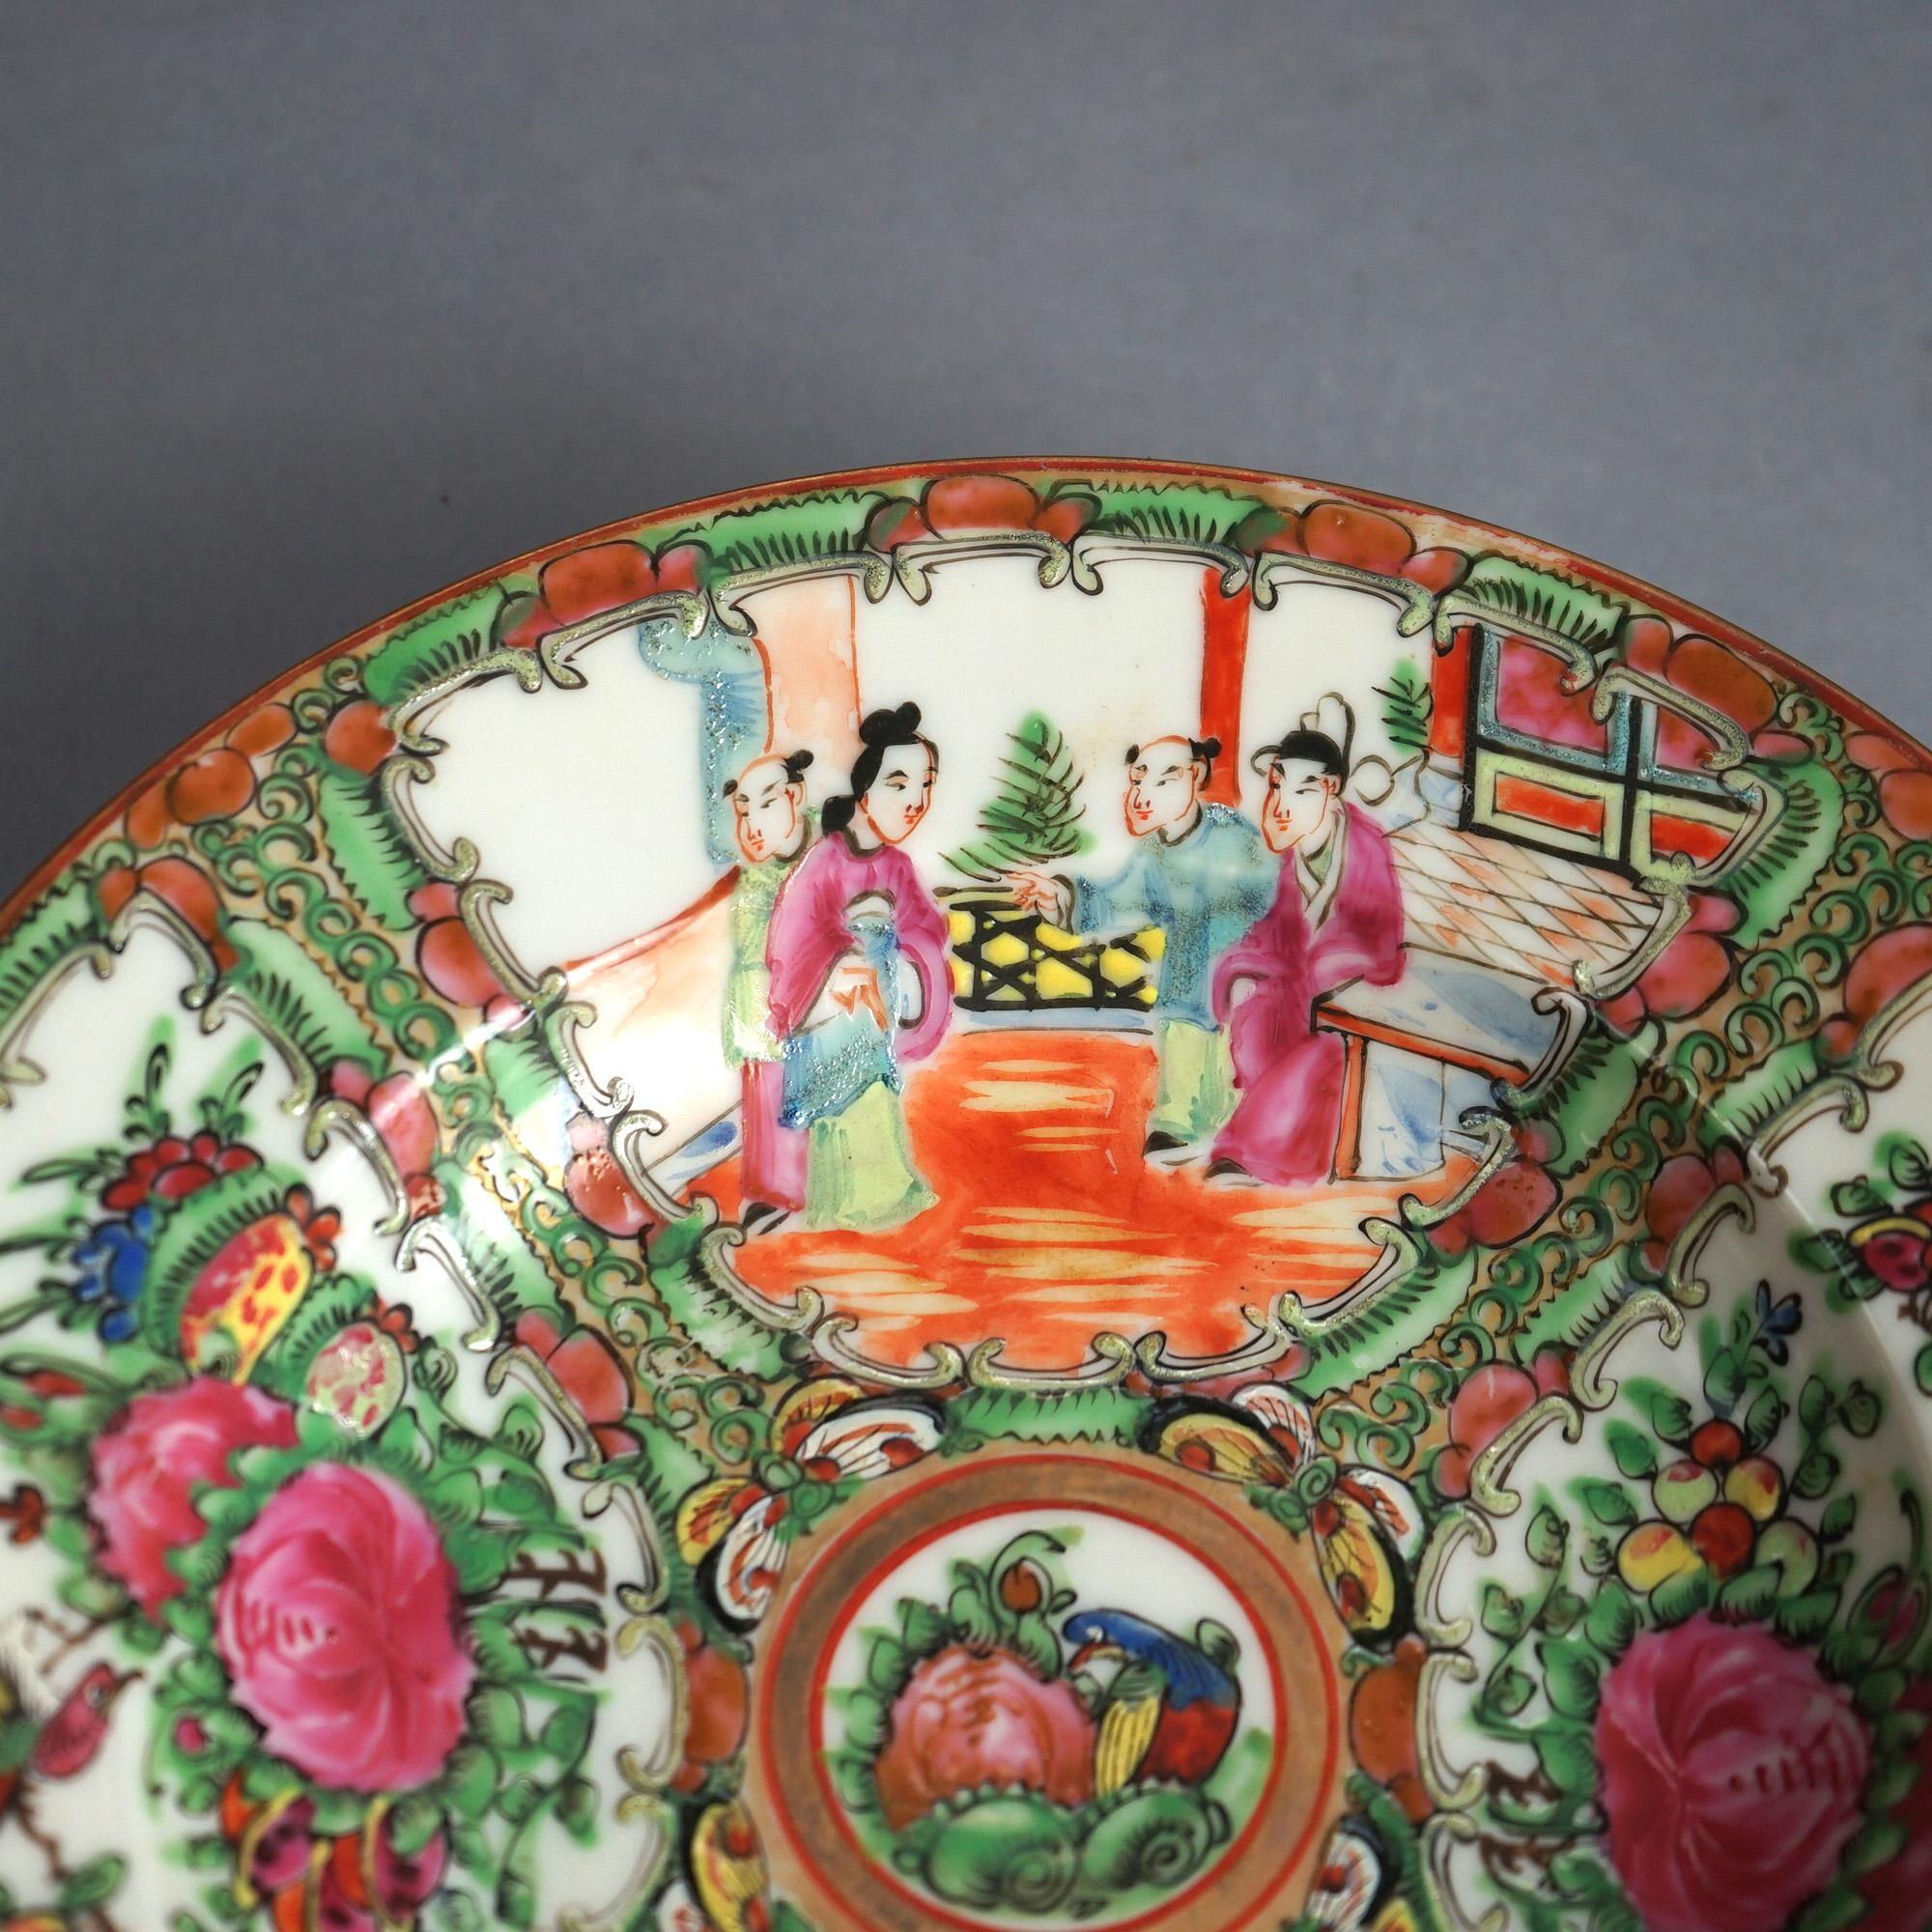 20th Century Antique Chinese Rose Medallion Porcelain Bowl with Gardens & Figures C1900 For Sale